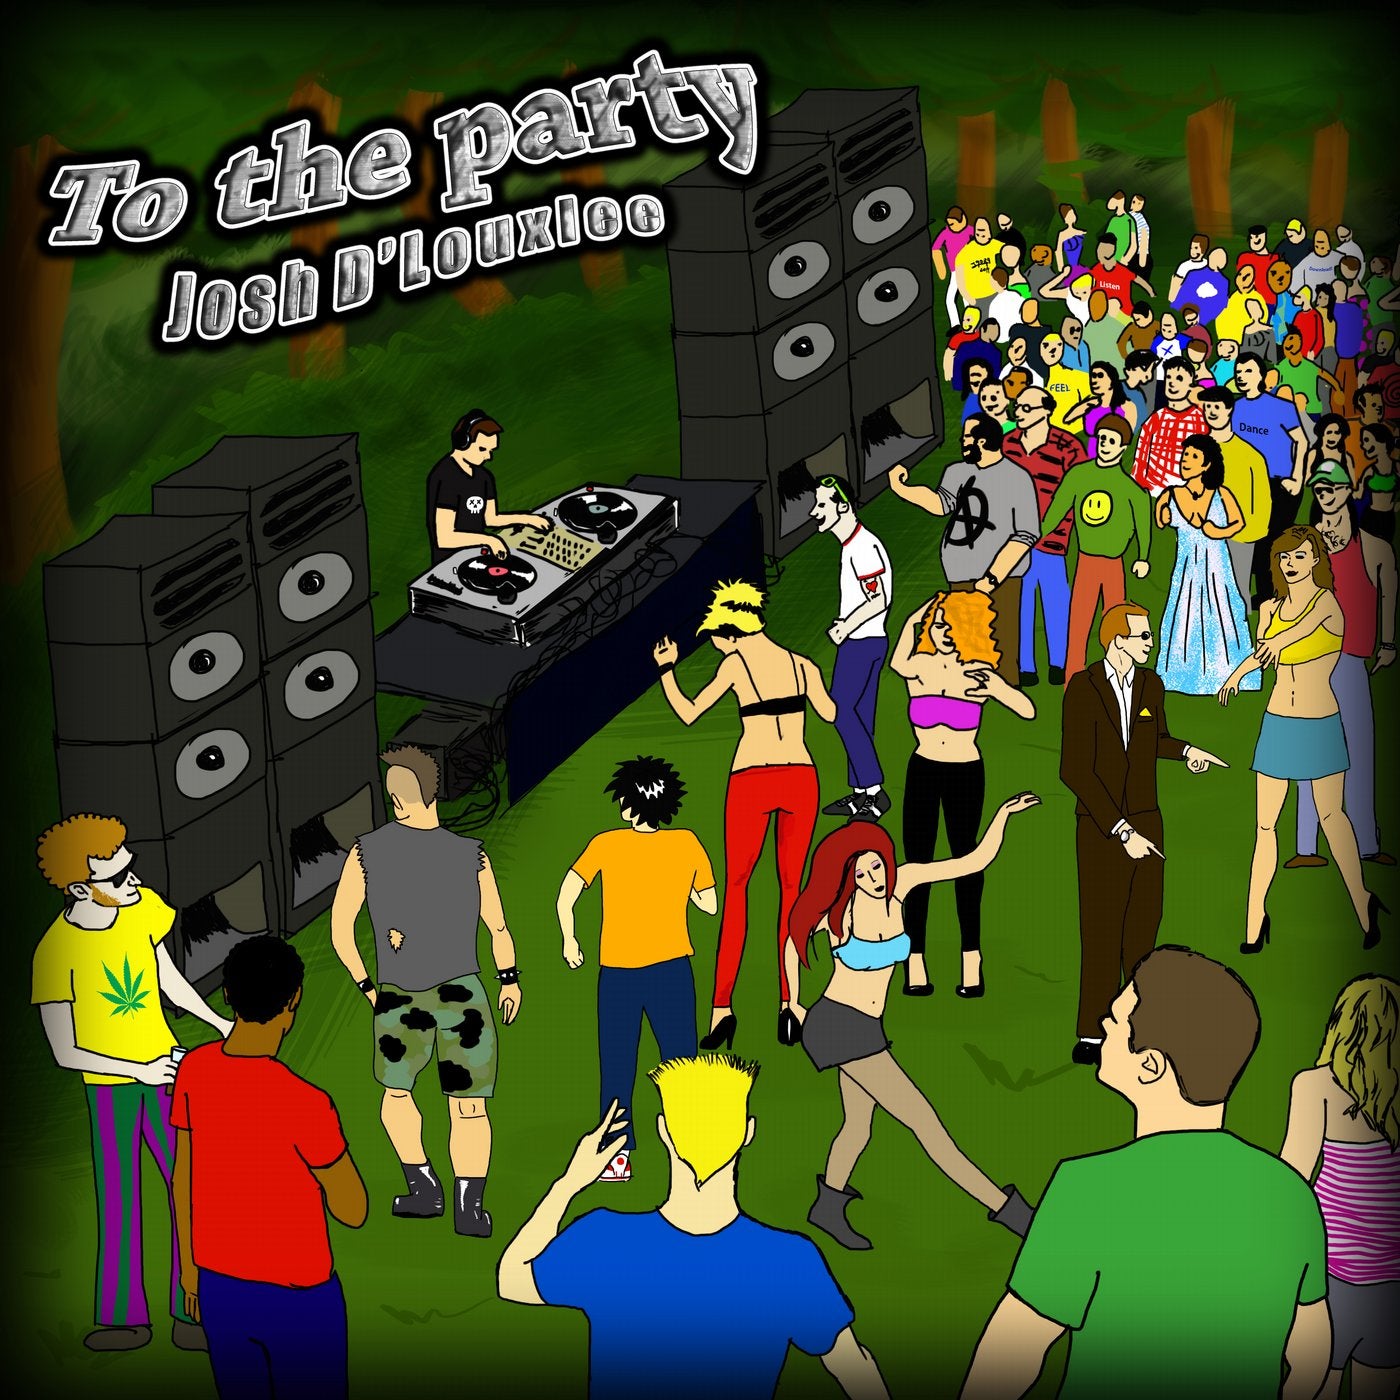 To the party E.P.